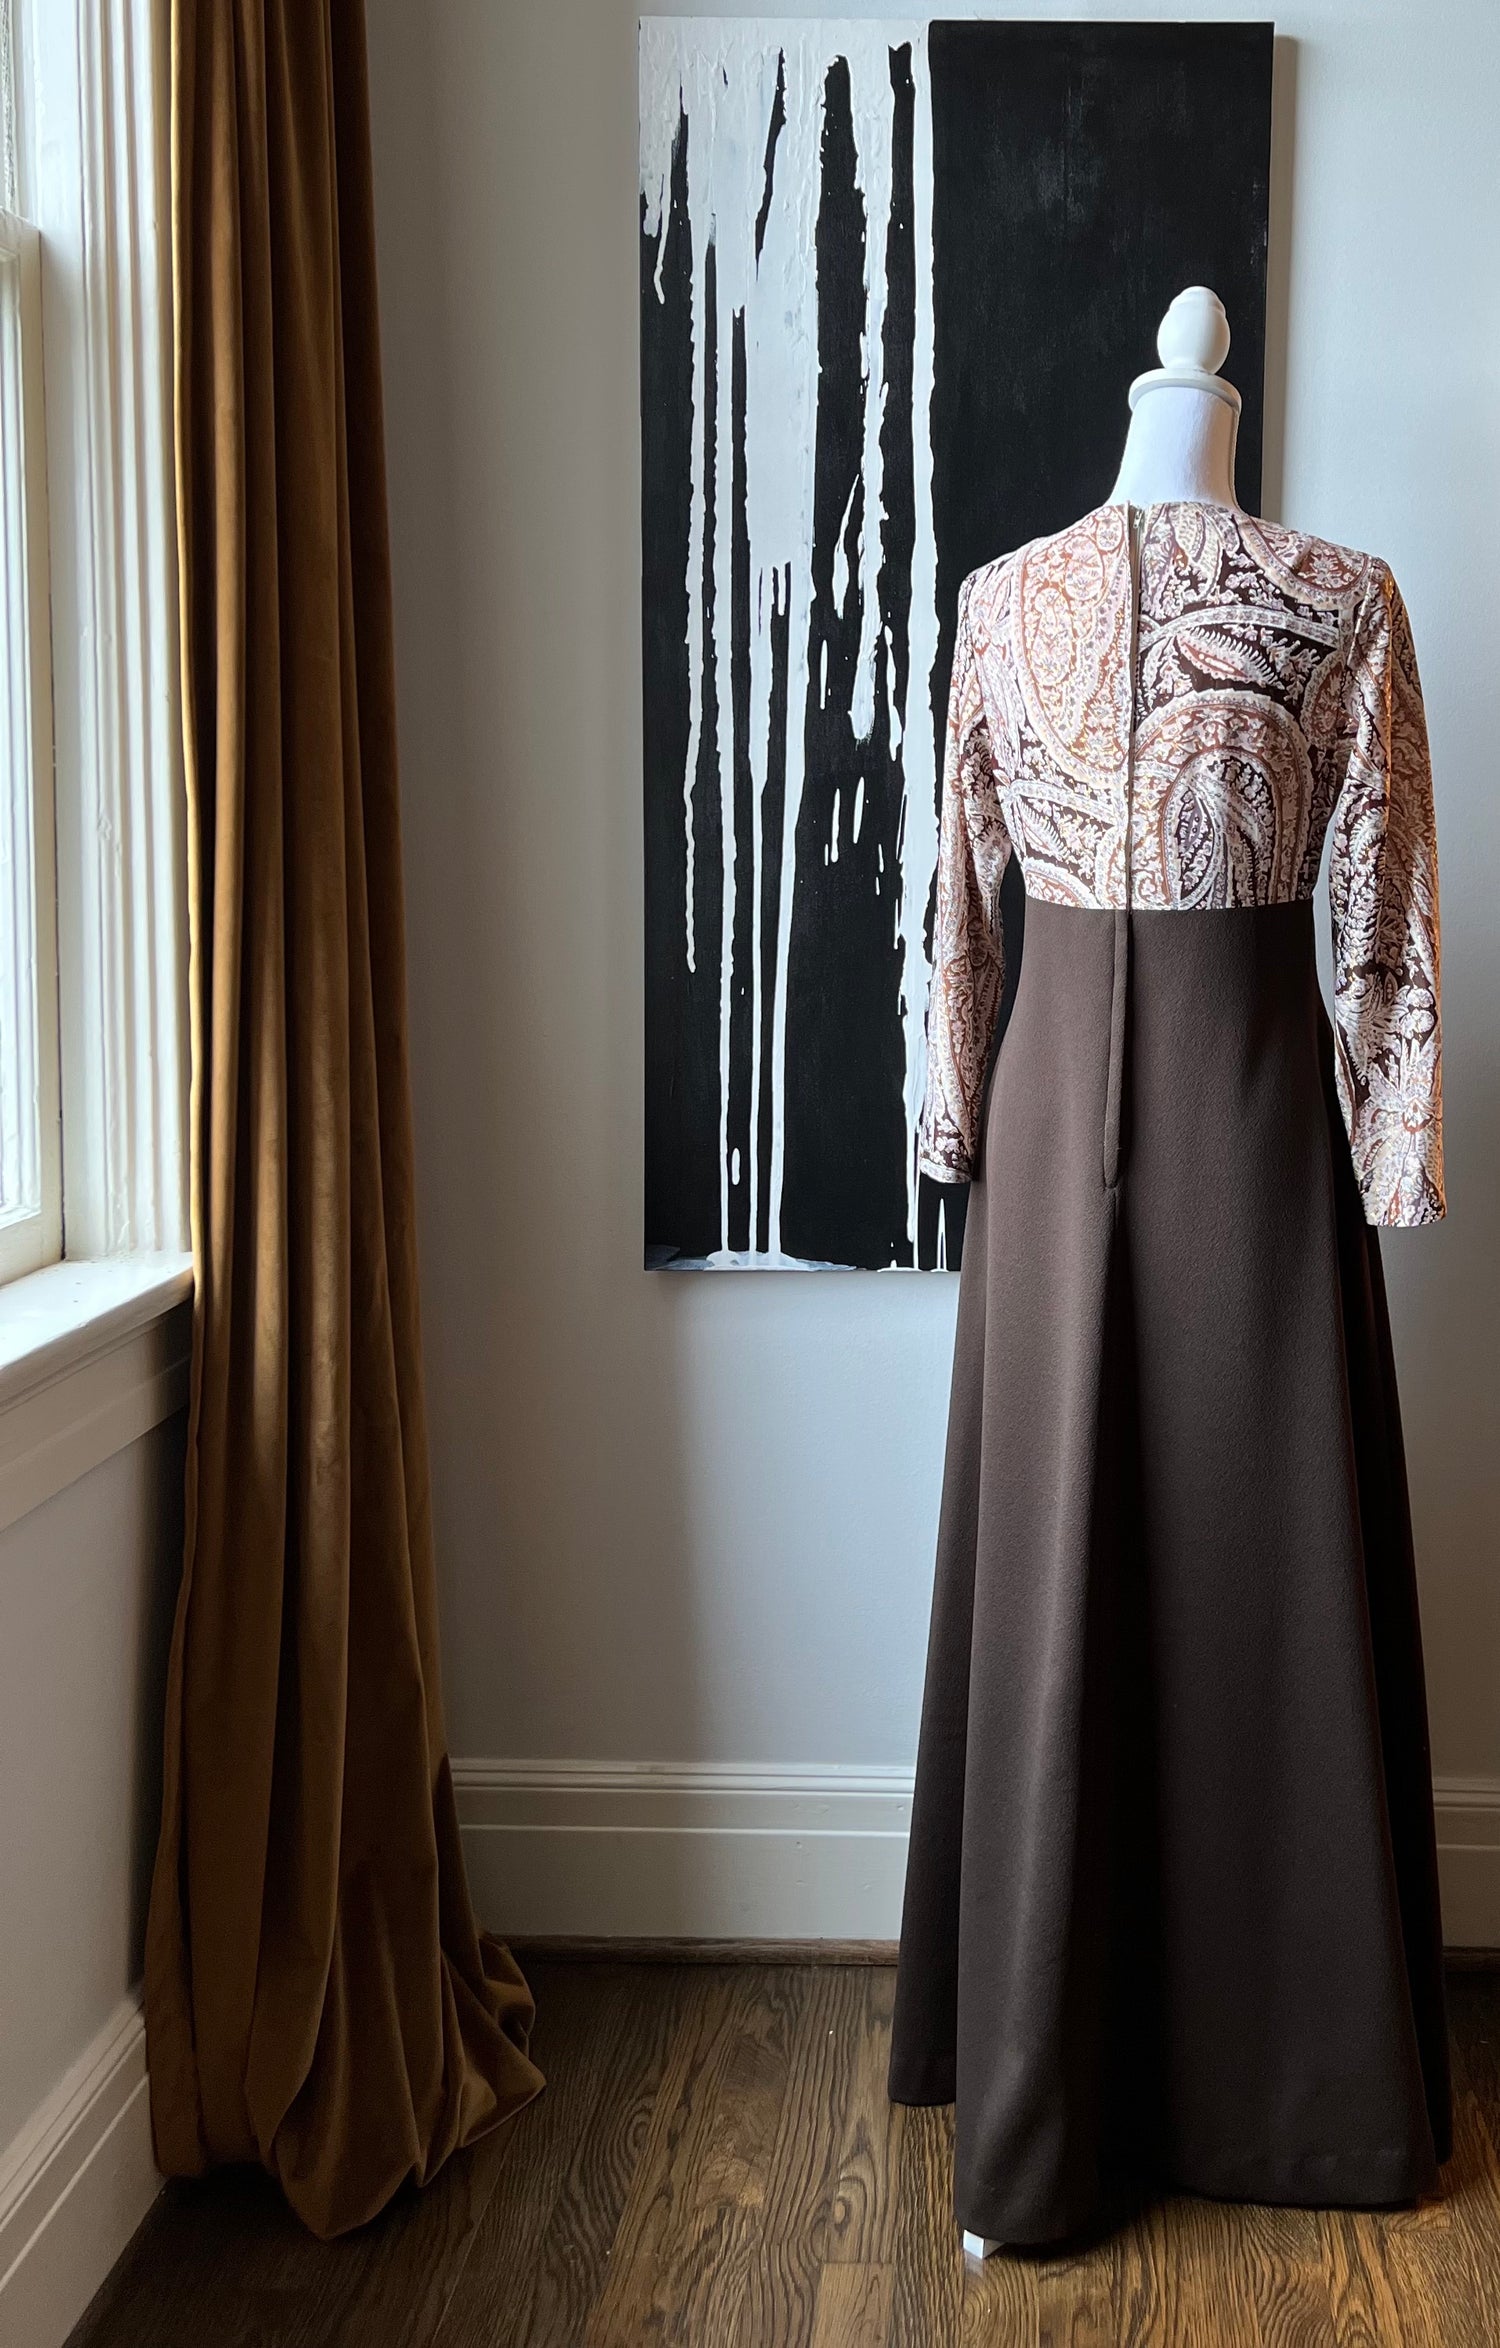 Brown paisley long dress with metallic gold thread and lace up top.